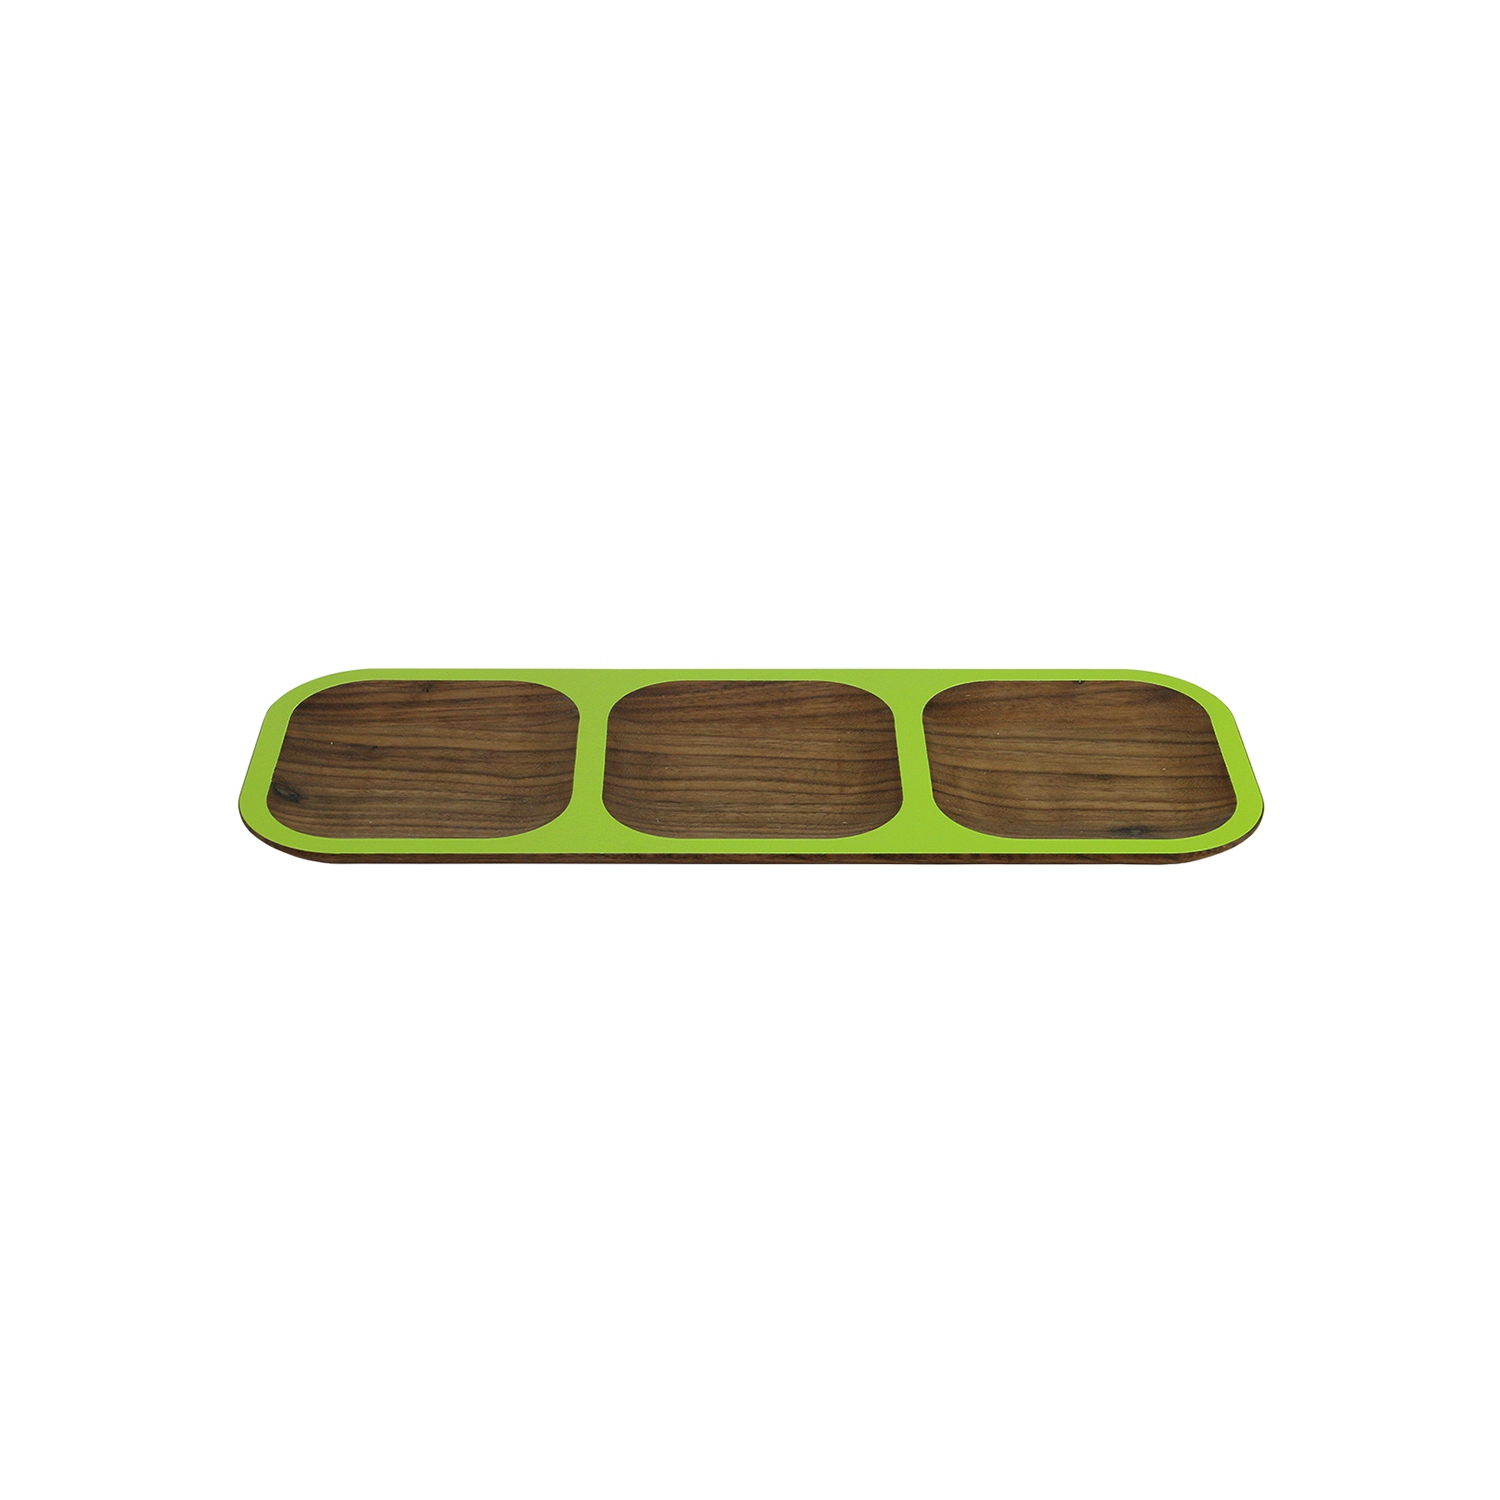 15" Blue and Green Handcrafted Rectangular Tasting Tray